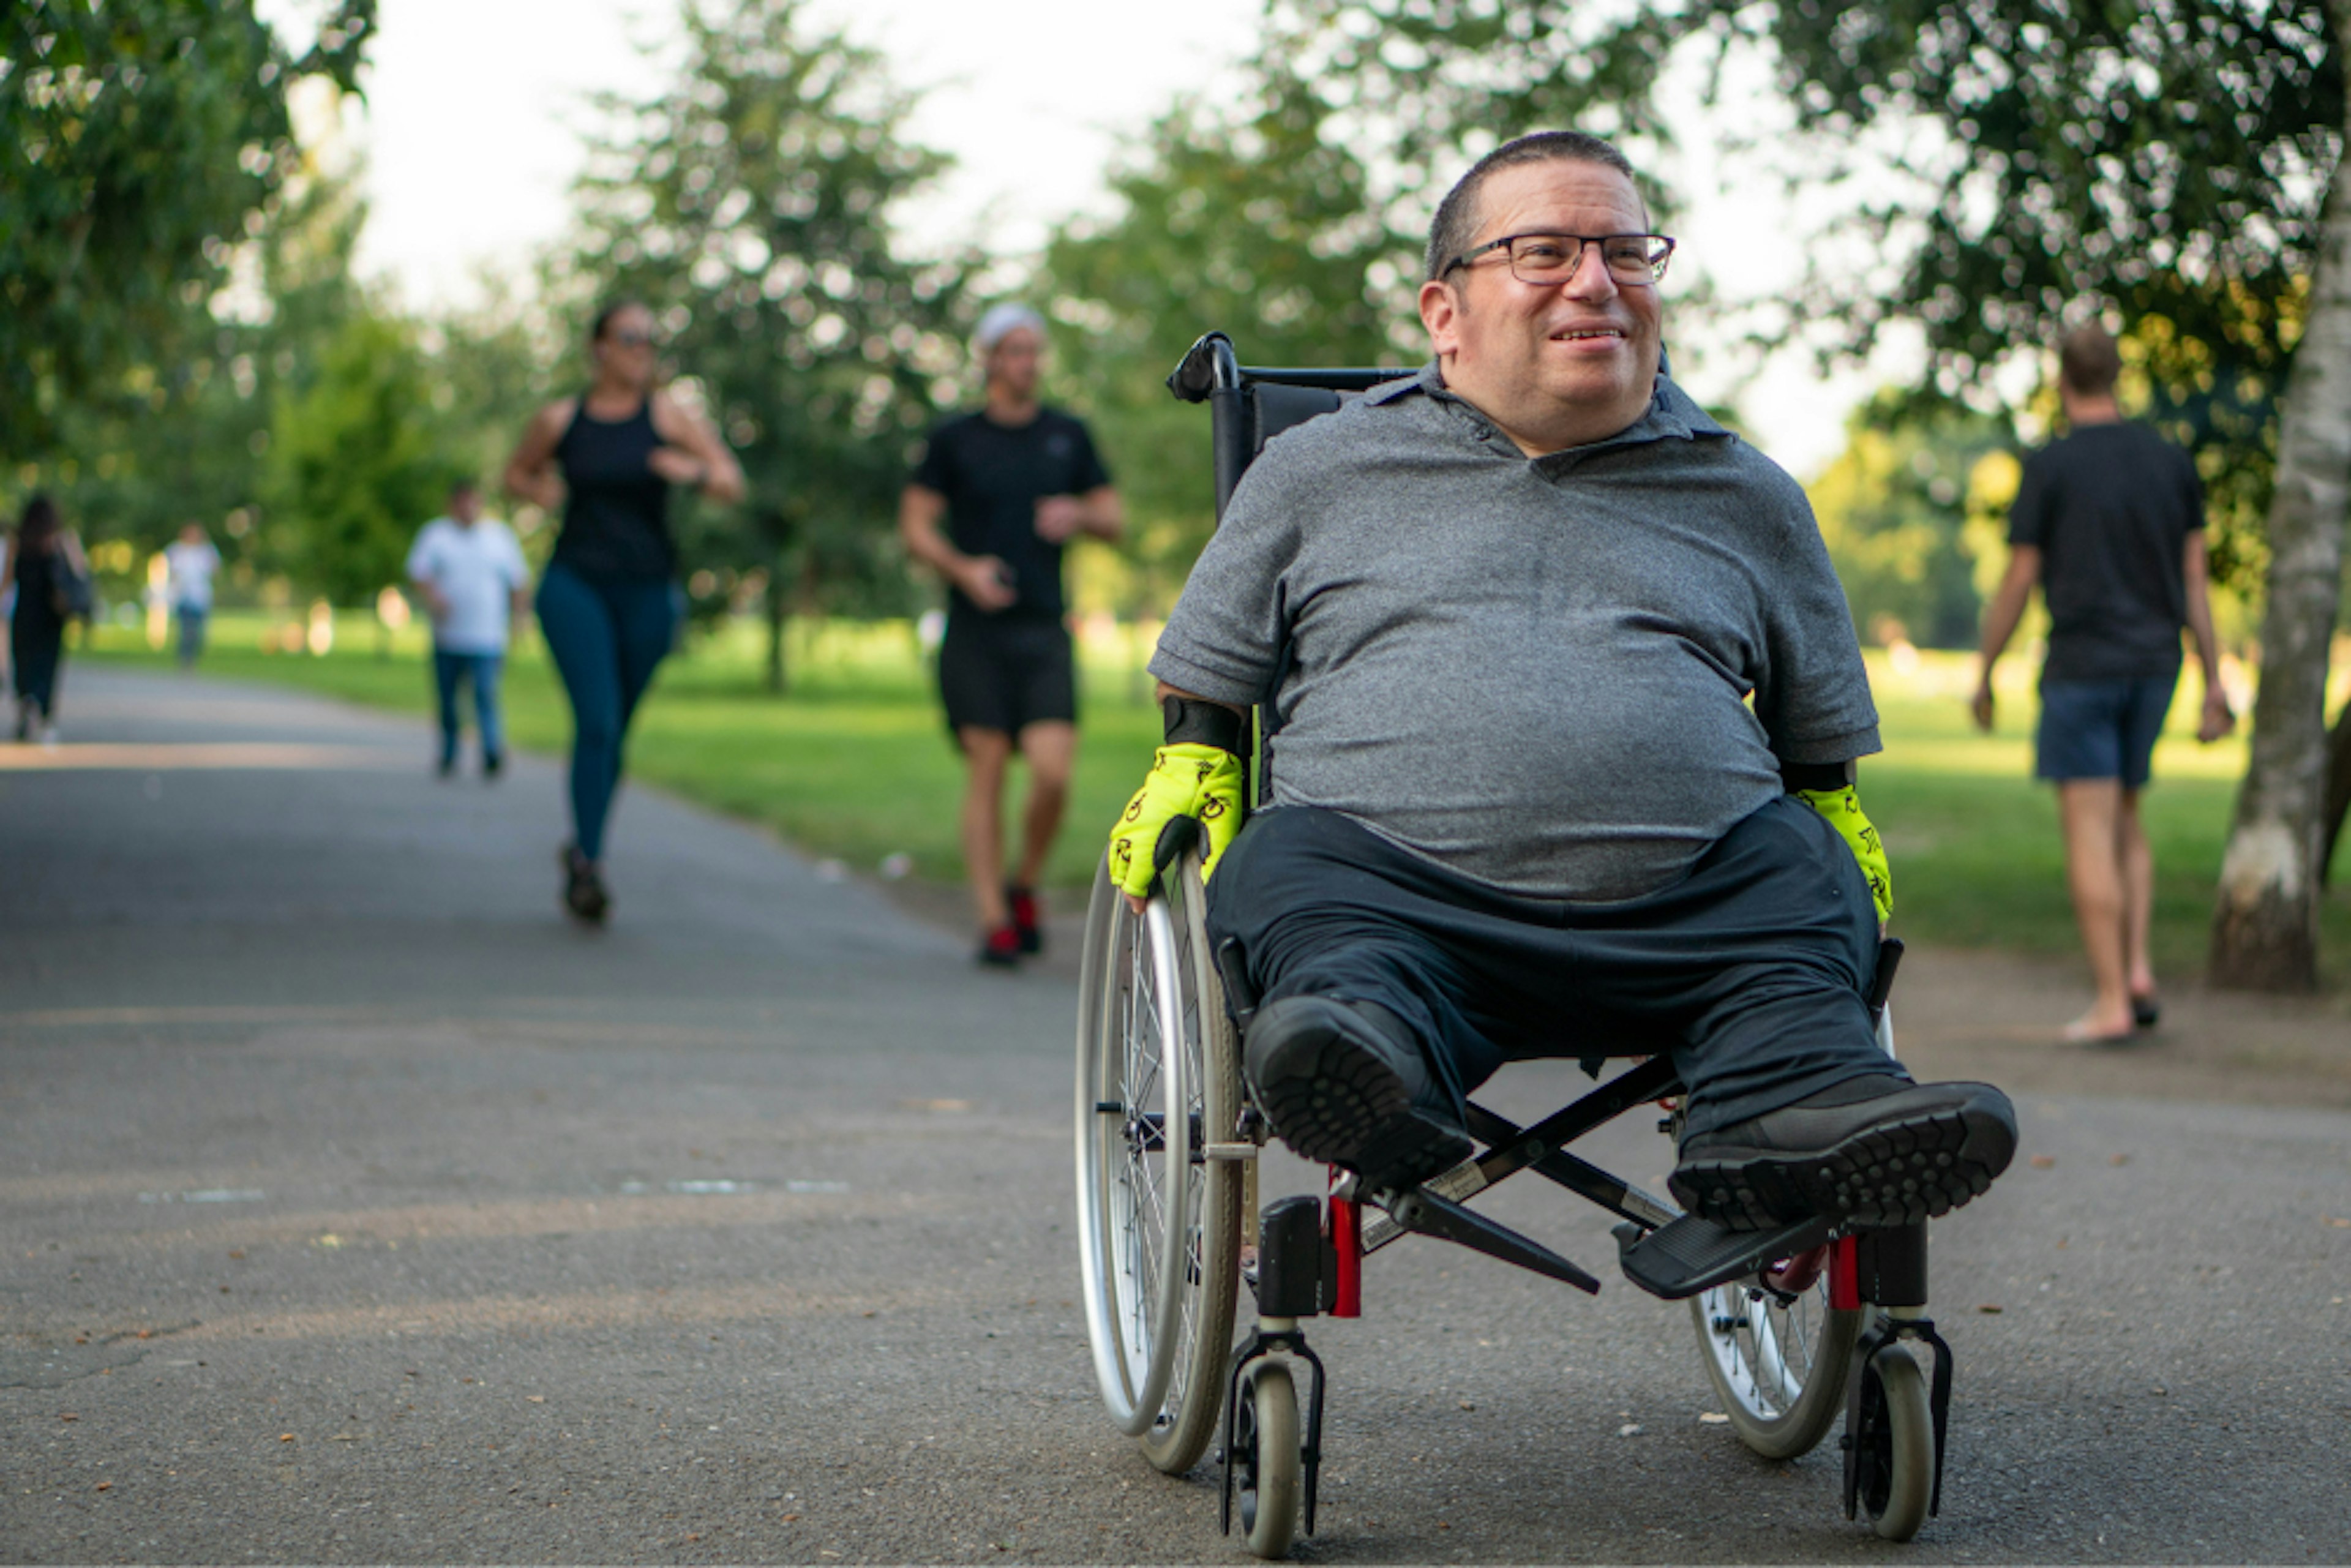 Pathway to Wellness Tile 1: Man in wheelchair on path in park.